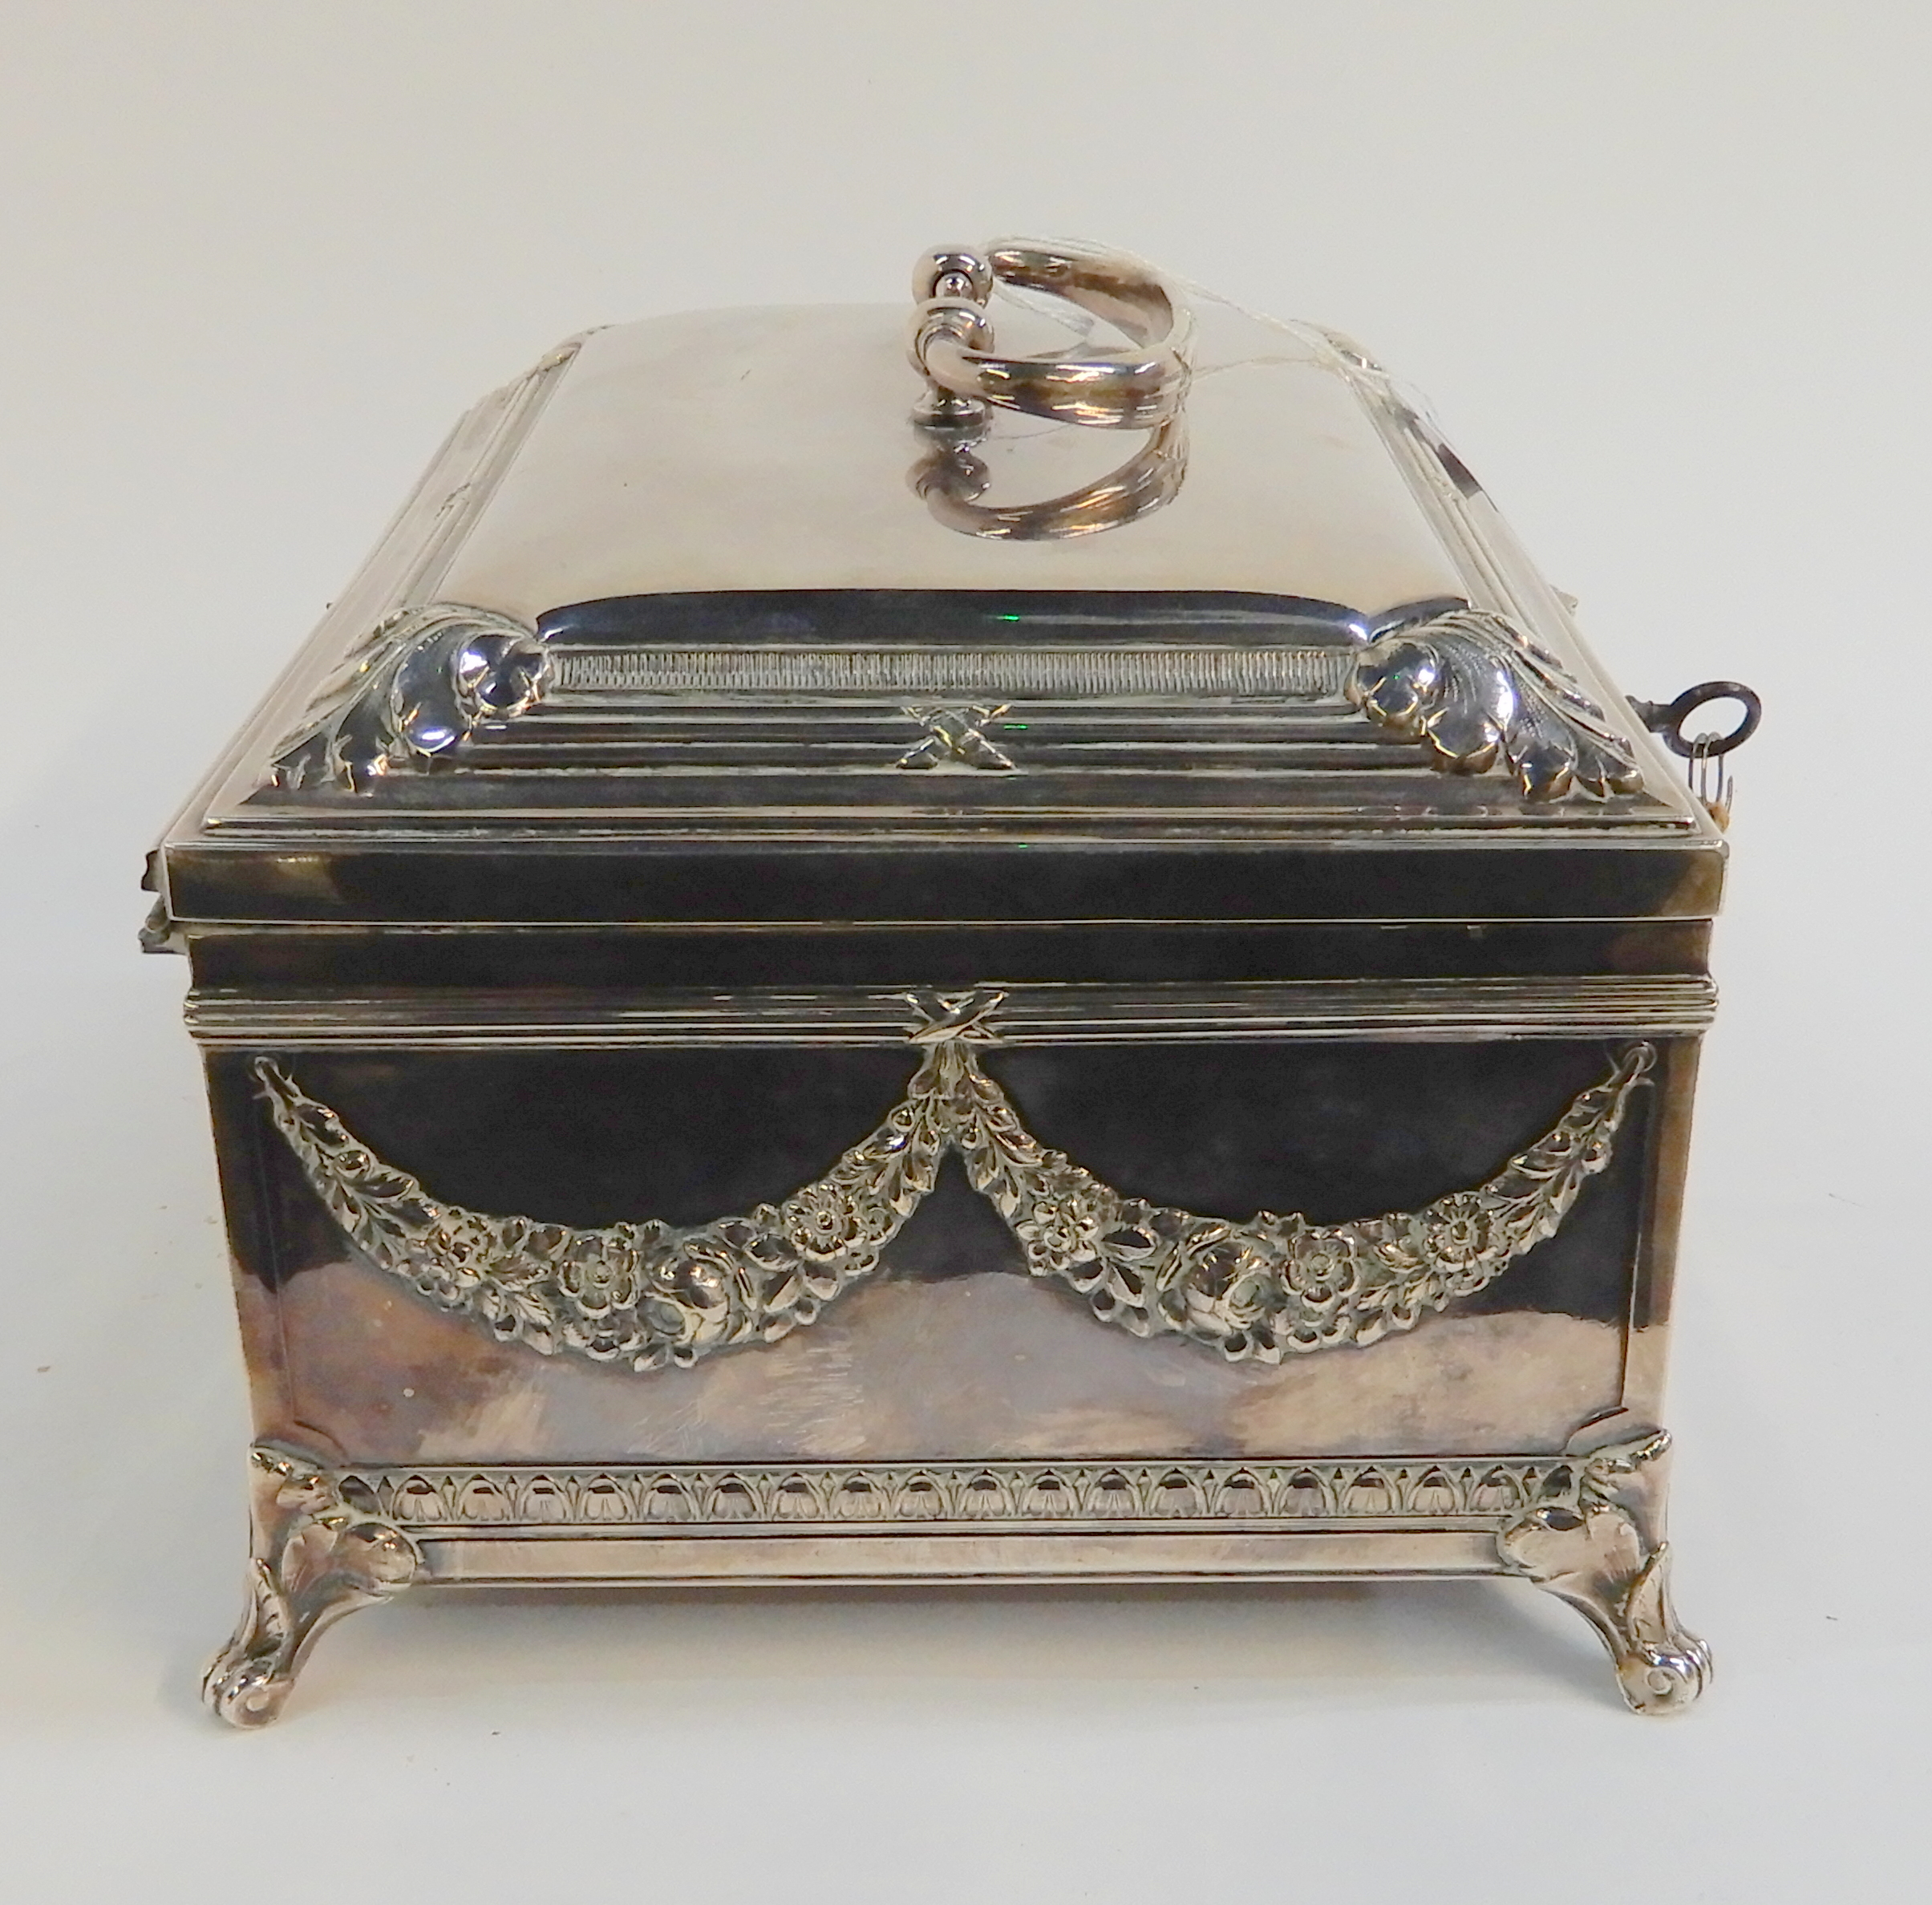 A silver plated casket decorated with floral swag decoration and fitted interior, 22cm x 16cm x 12cm - Image 2 of 3